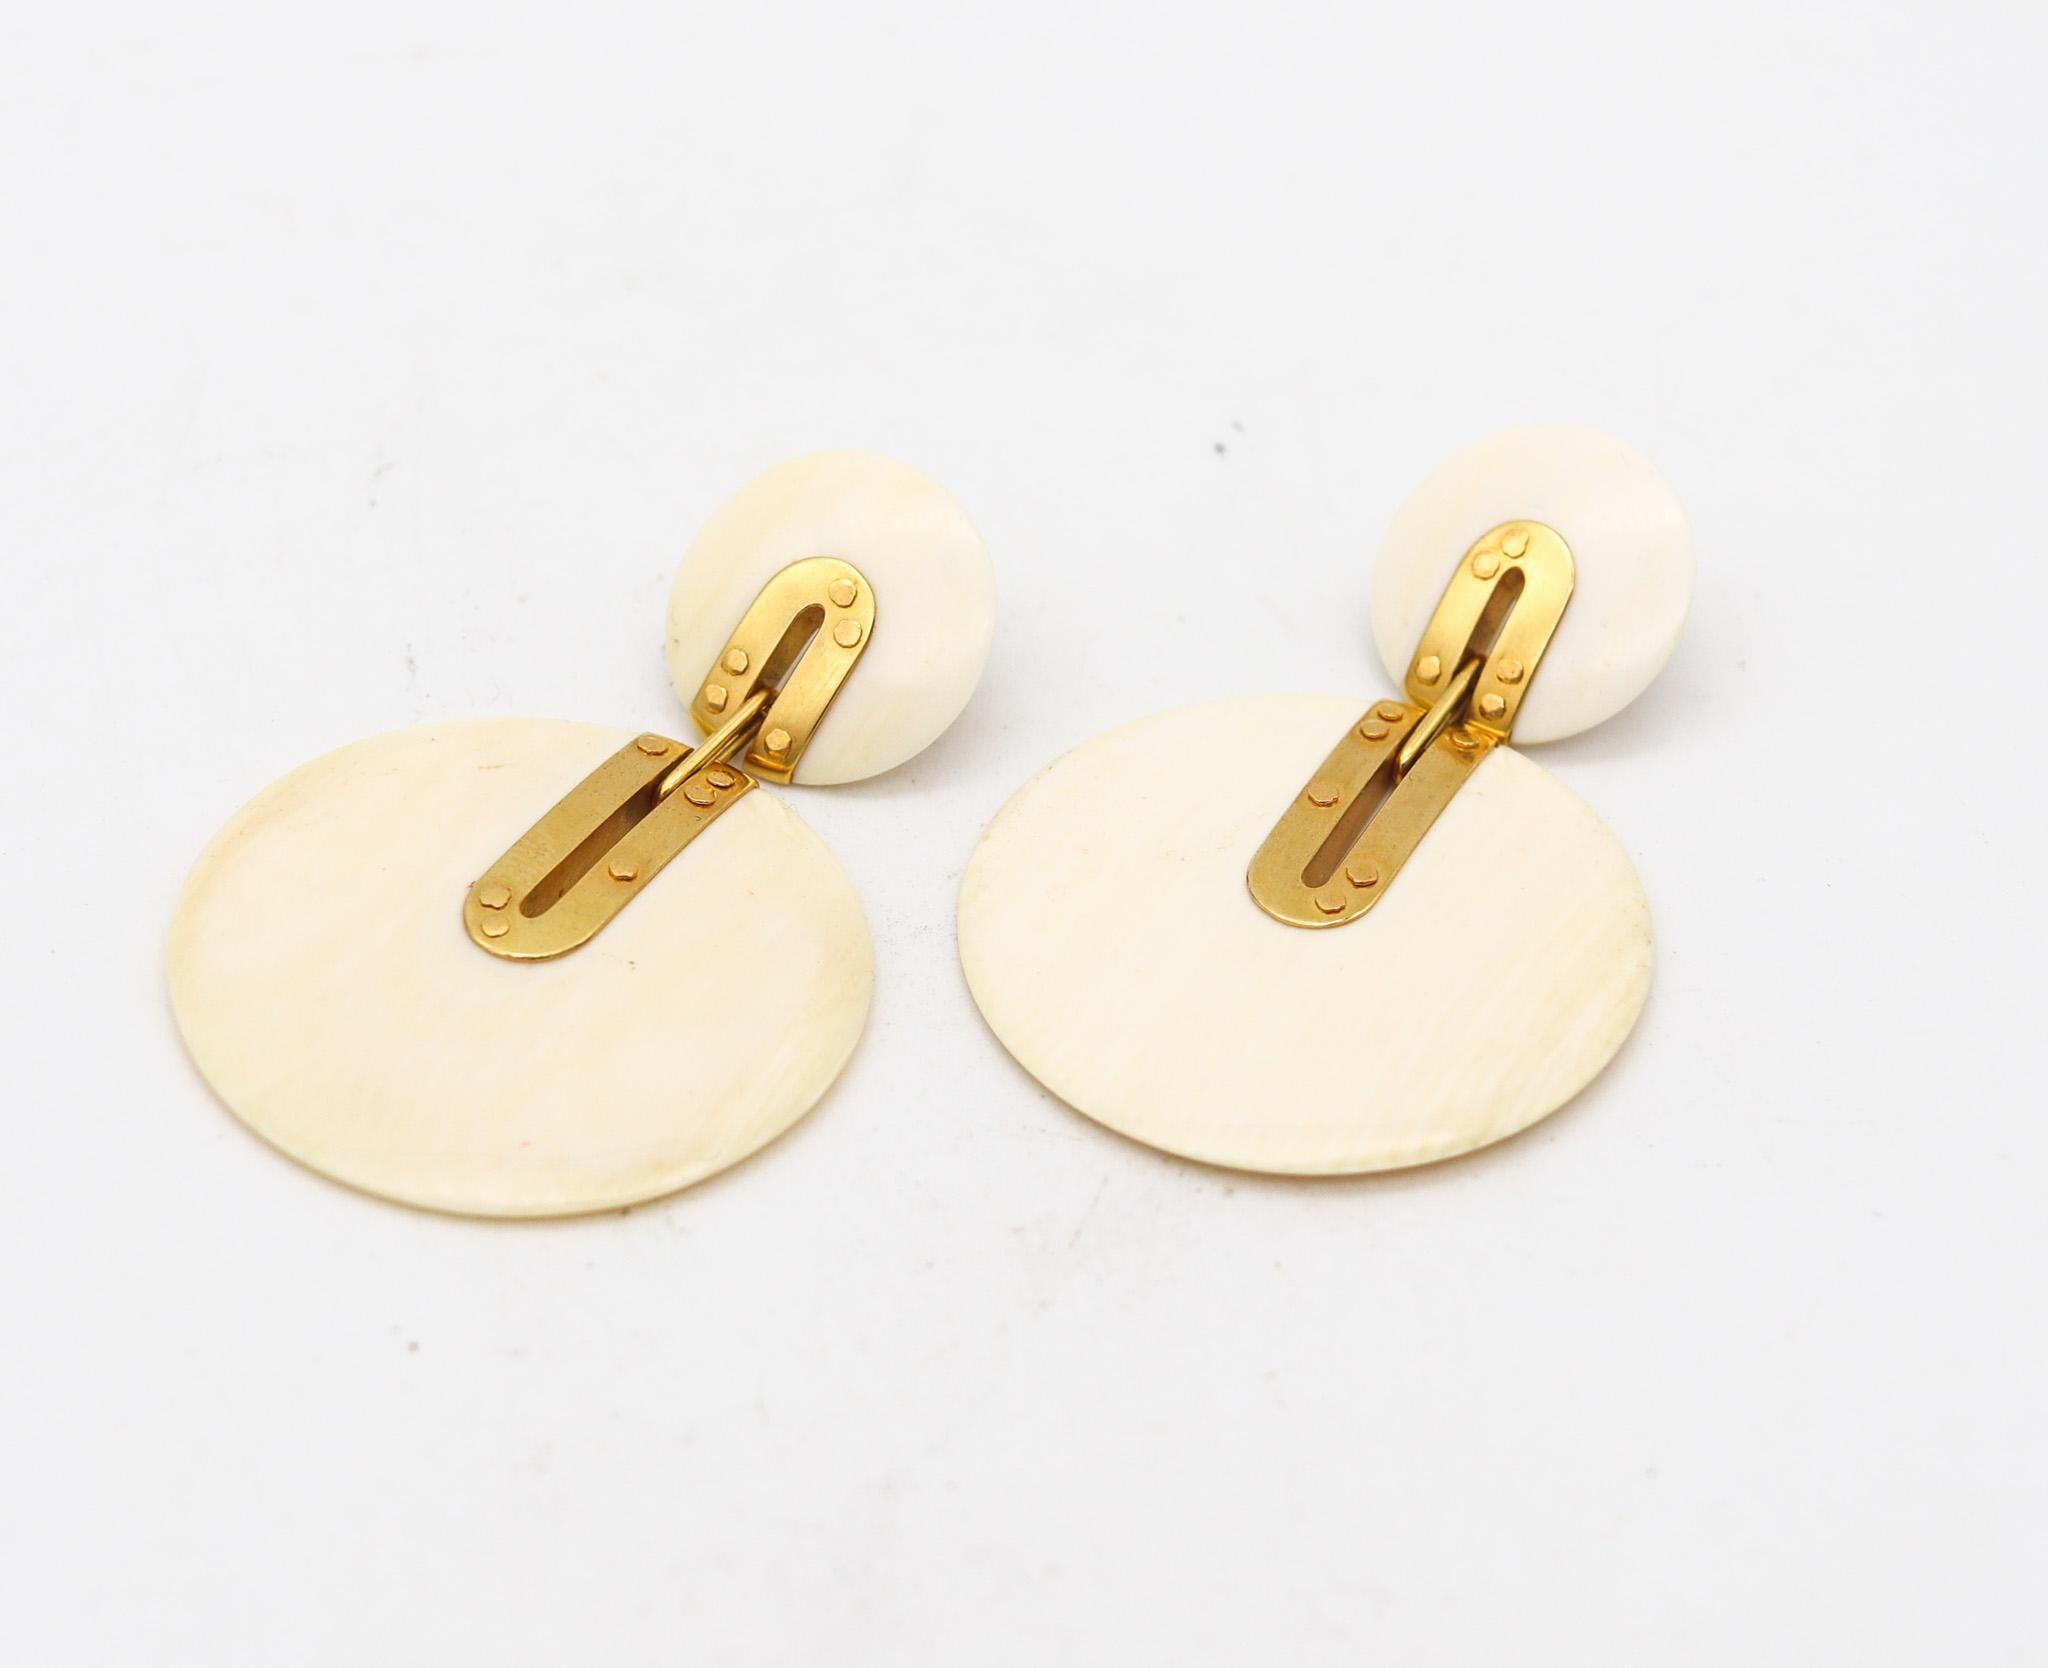 German Modernist 1970 Geometric Statement Dangle Drop Earrings 18Kt Yellow Gold In Excellent Condition For Sale In Miami, FL